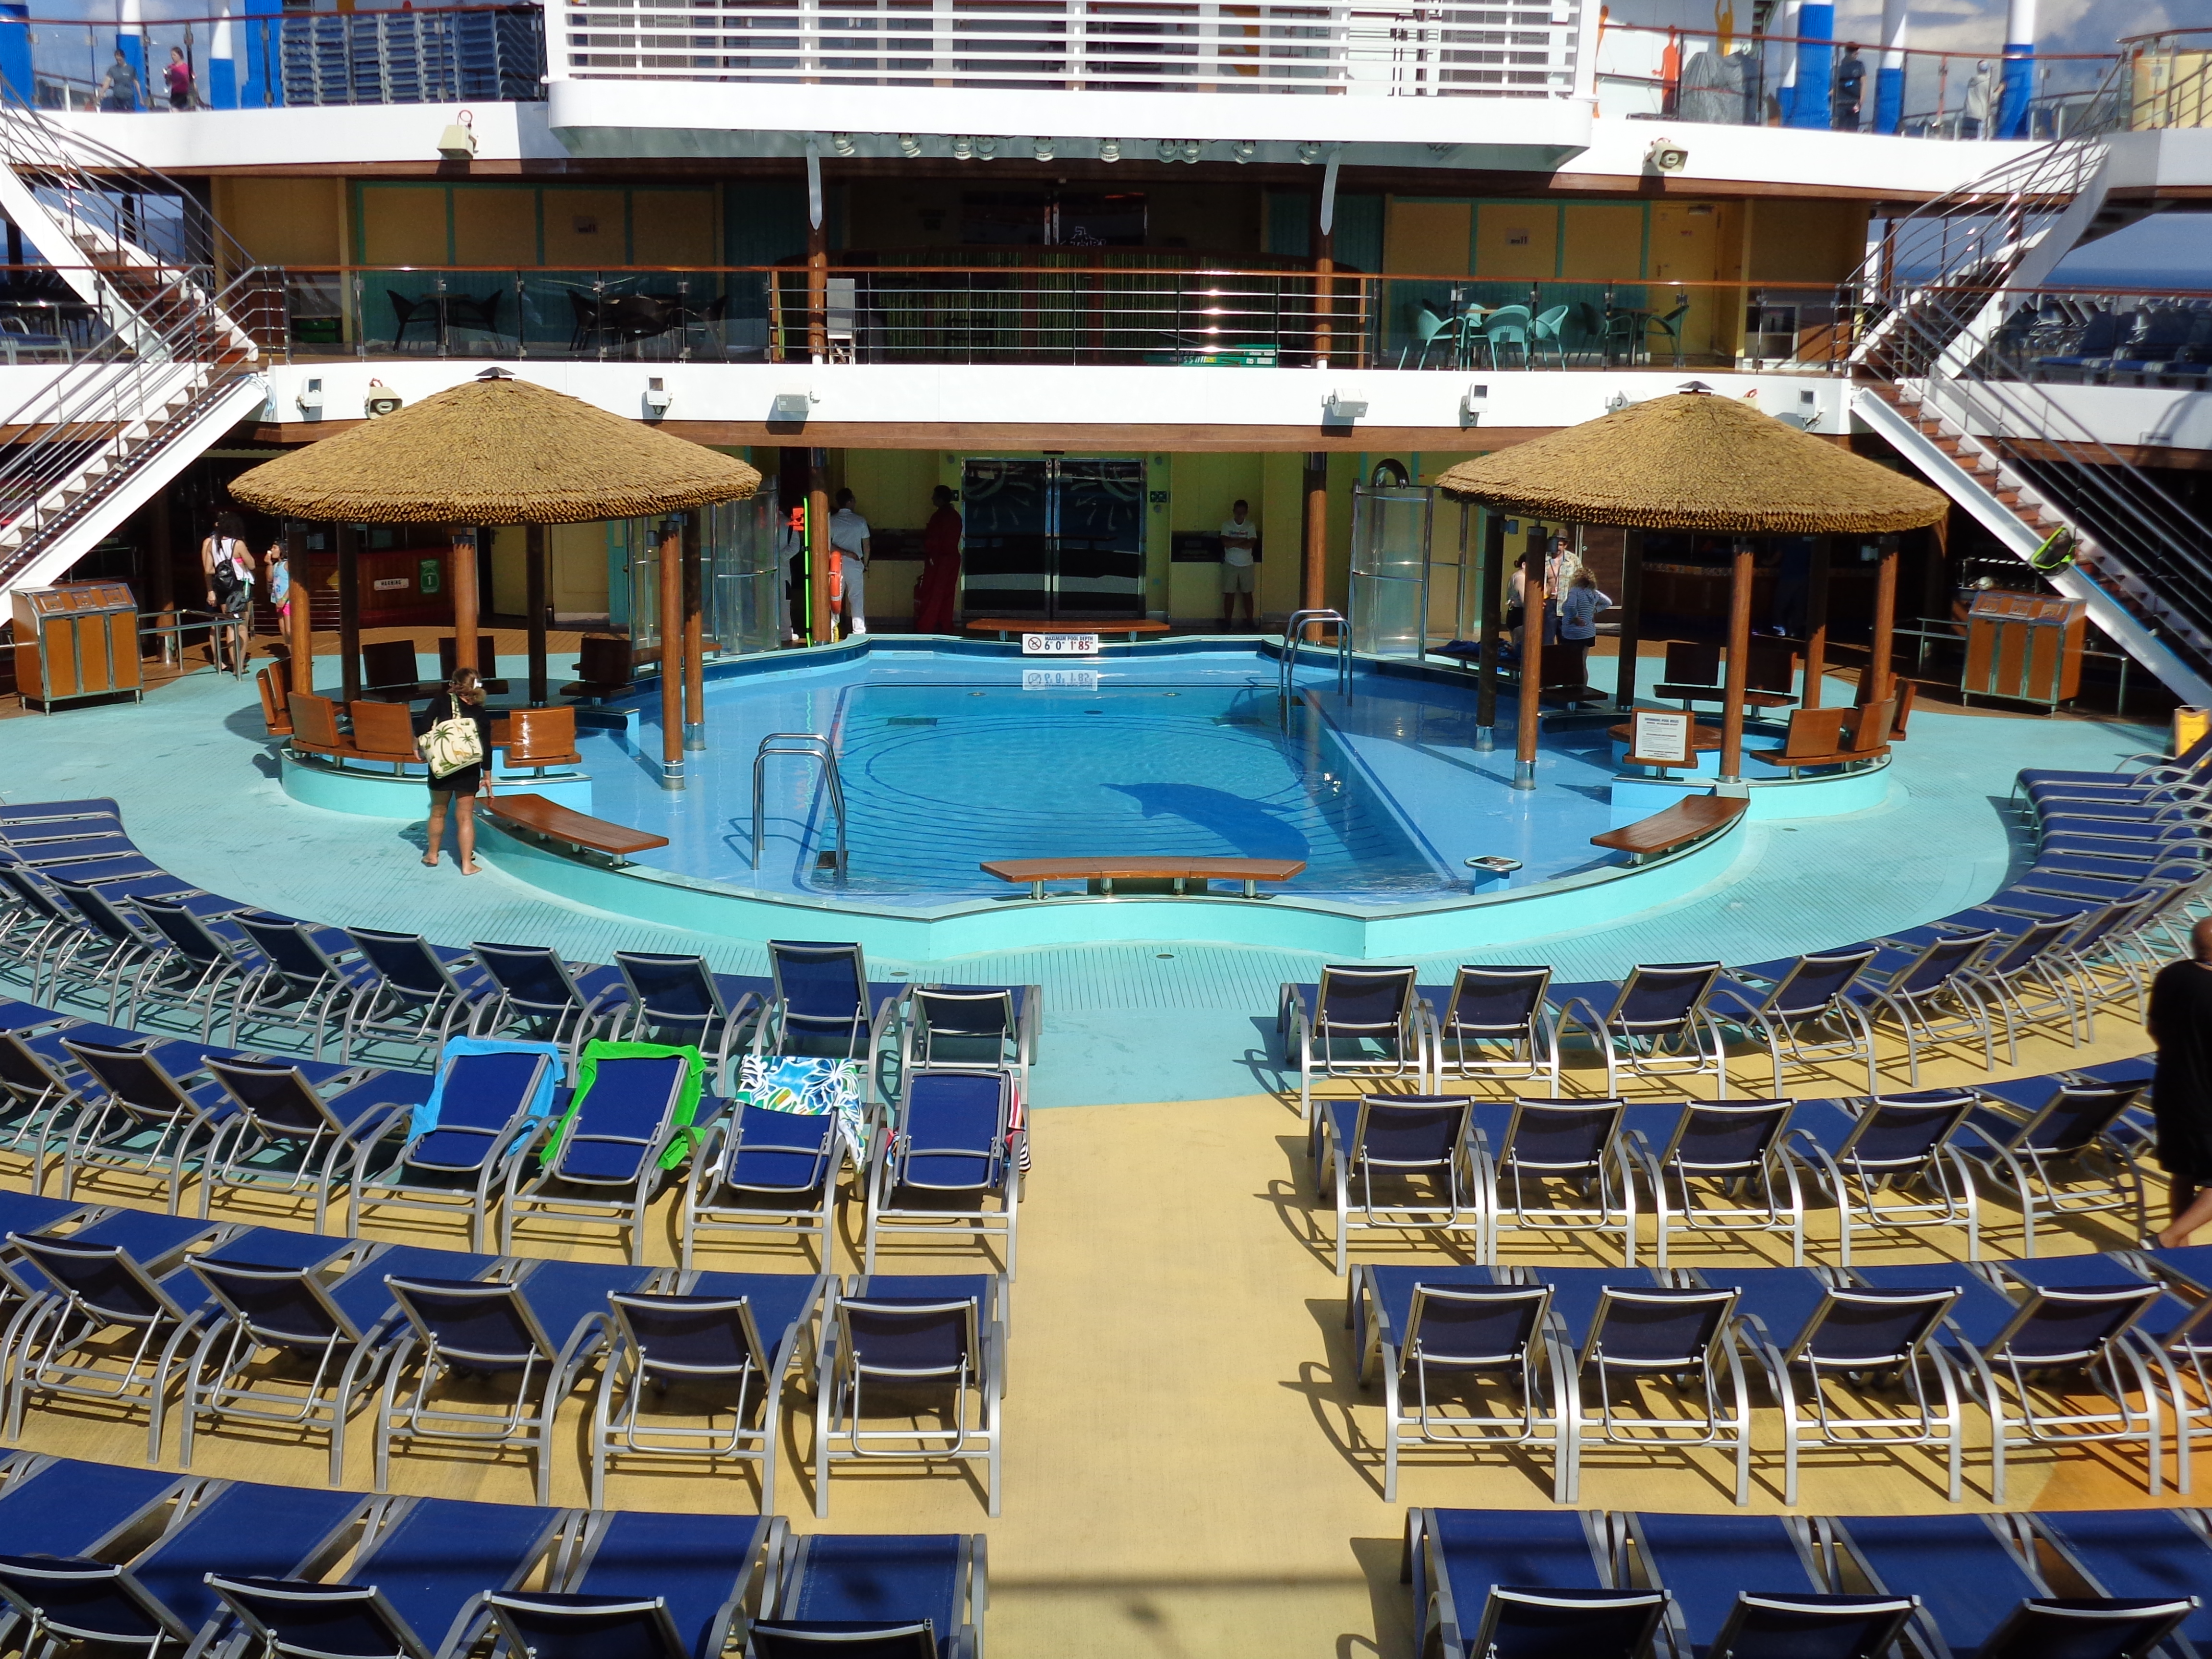 Pools on the Carnival Vista